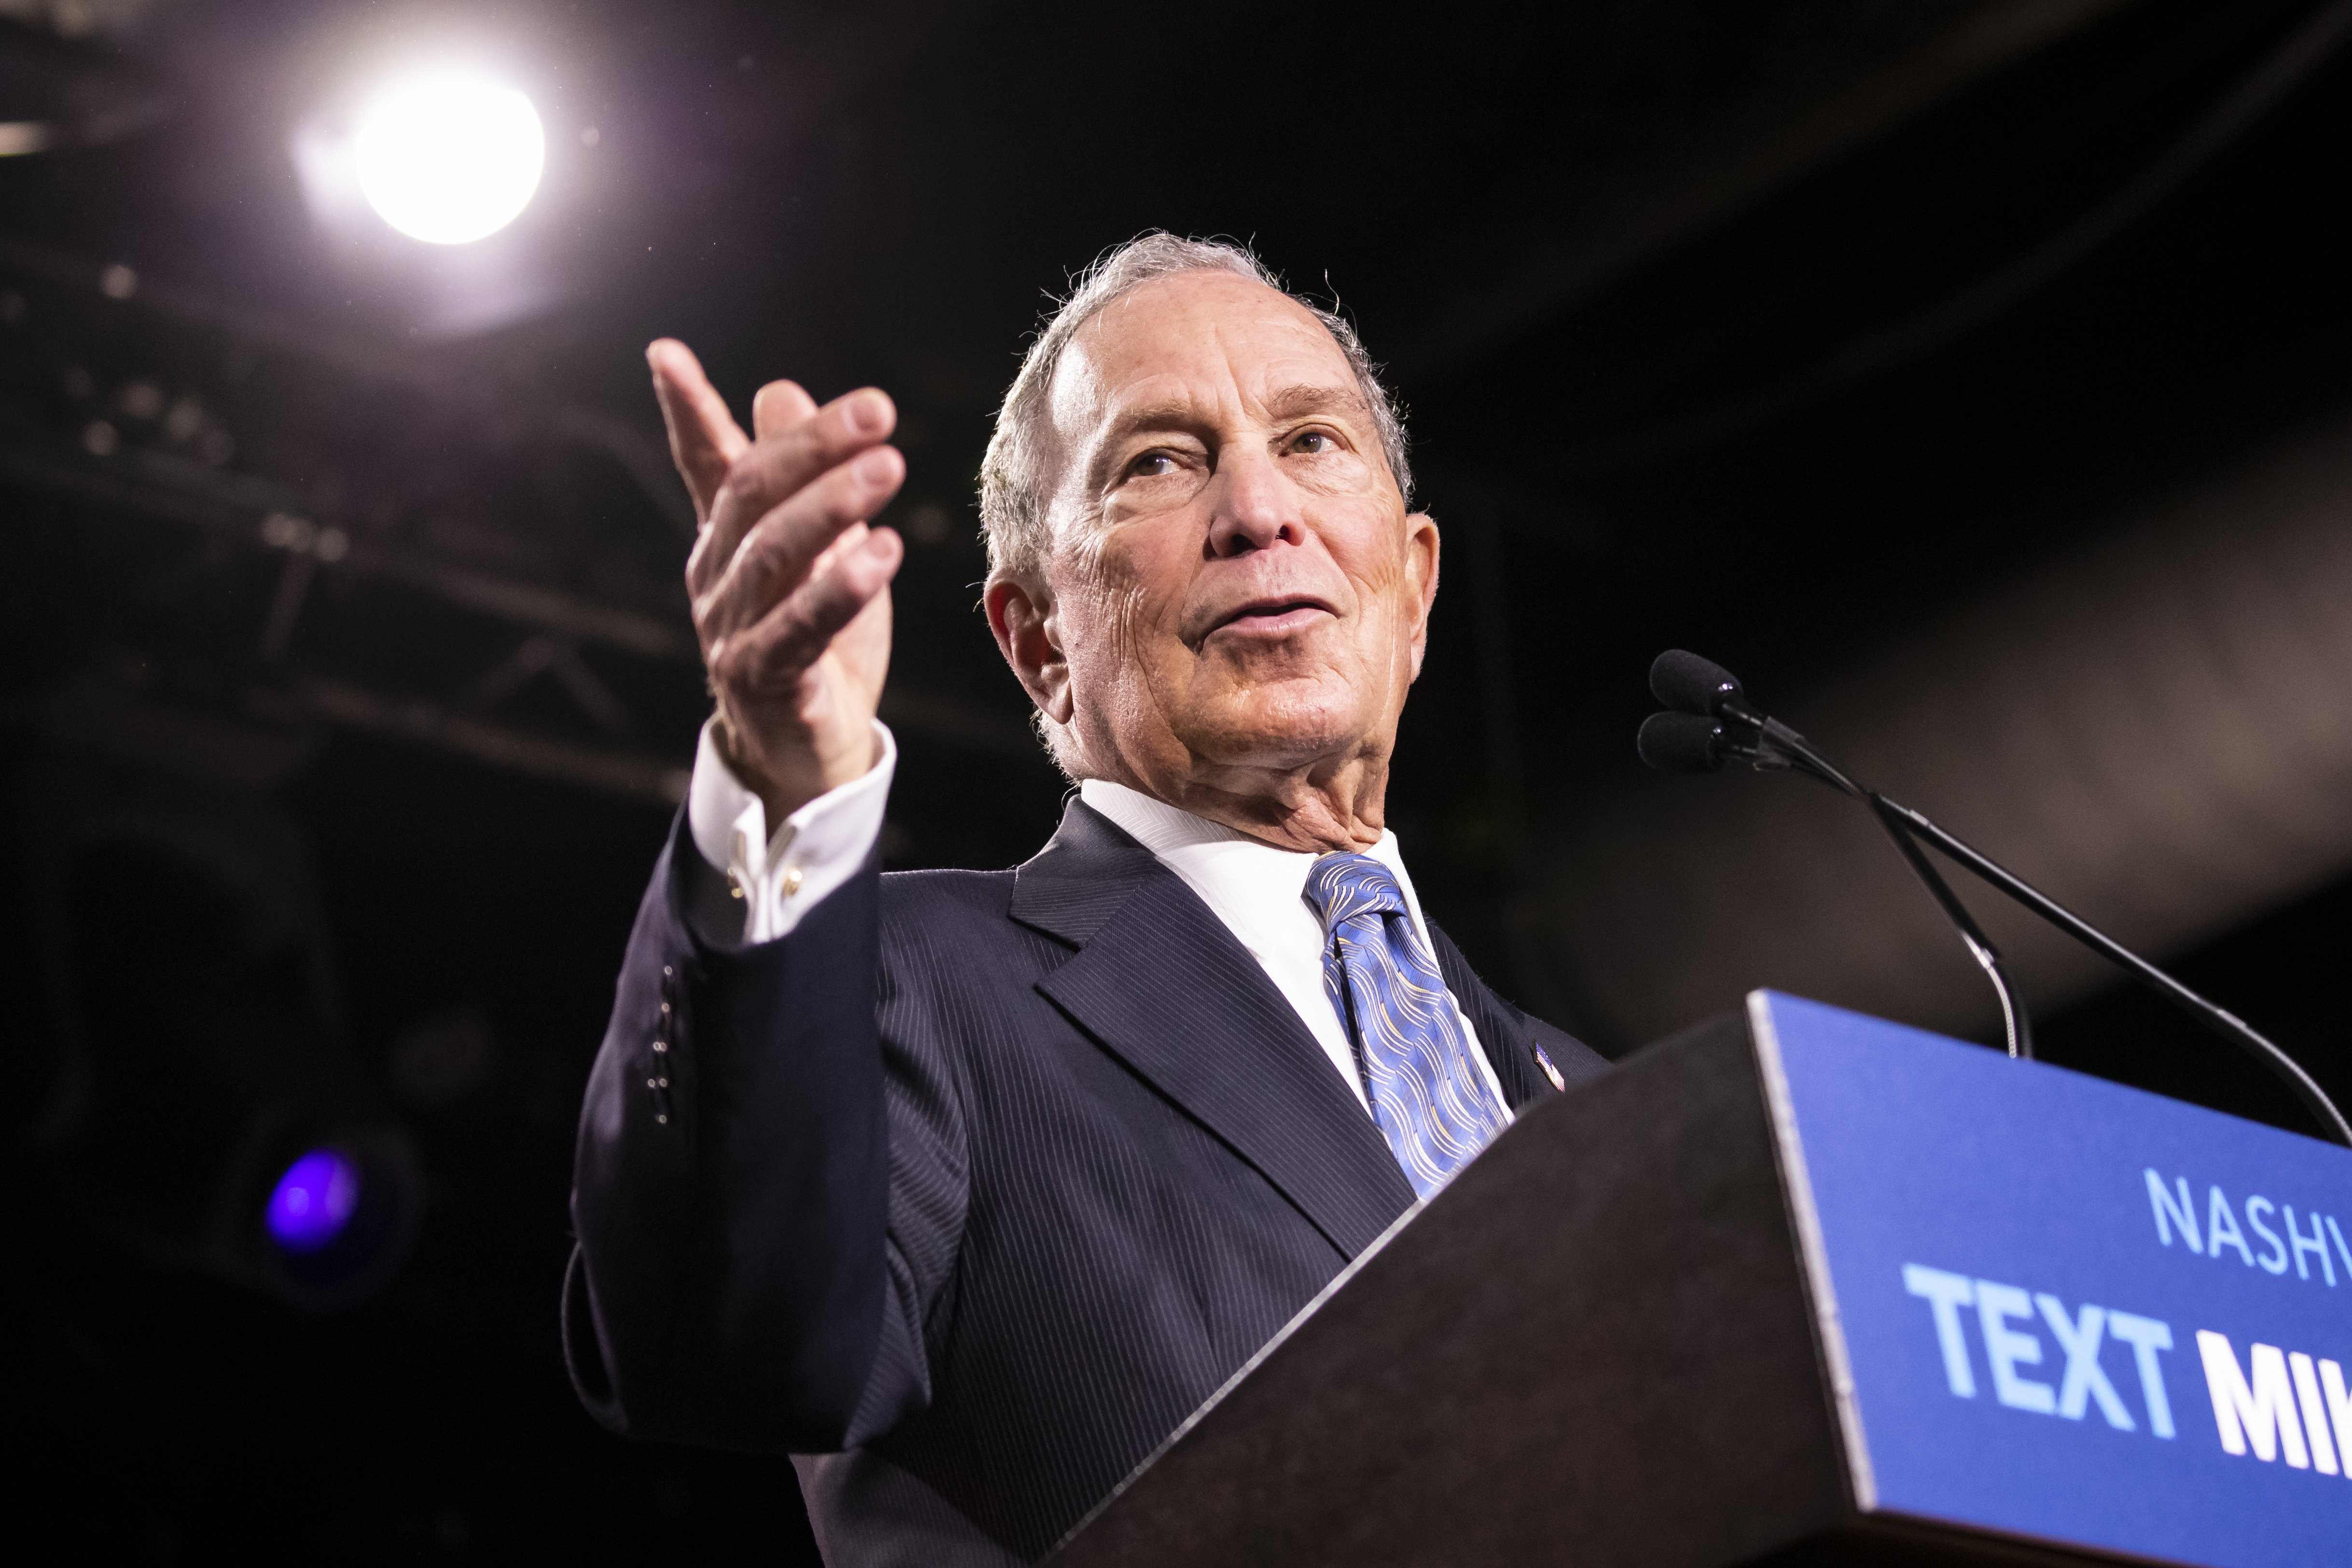 Mike Bloomberg speaking from a podium on the campaign trail.